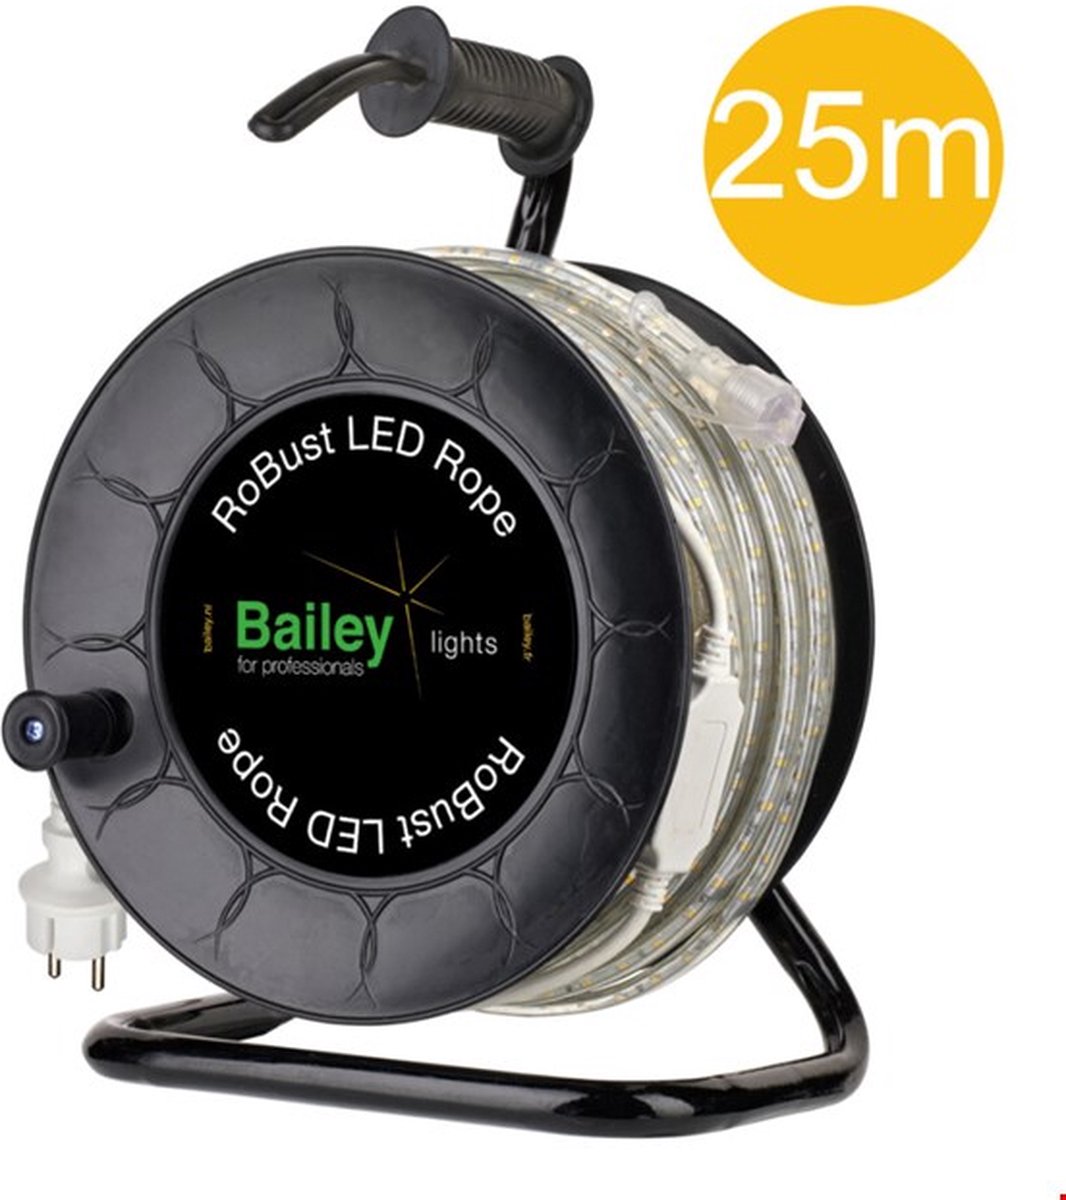 Bailey BAI RoBust LED Rope HO - 25M - 760lm/m - wit - IP65 op kabelhaspel - incl. AC/DC adapter - Bailey